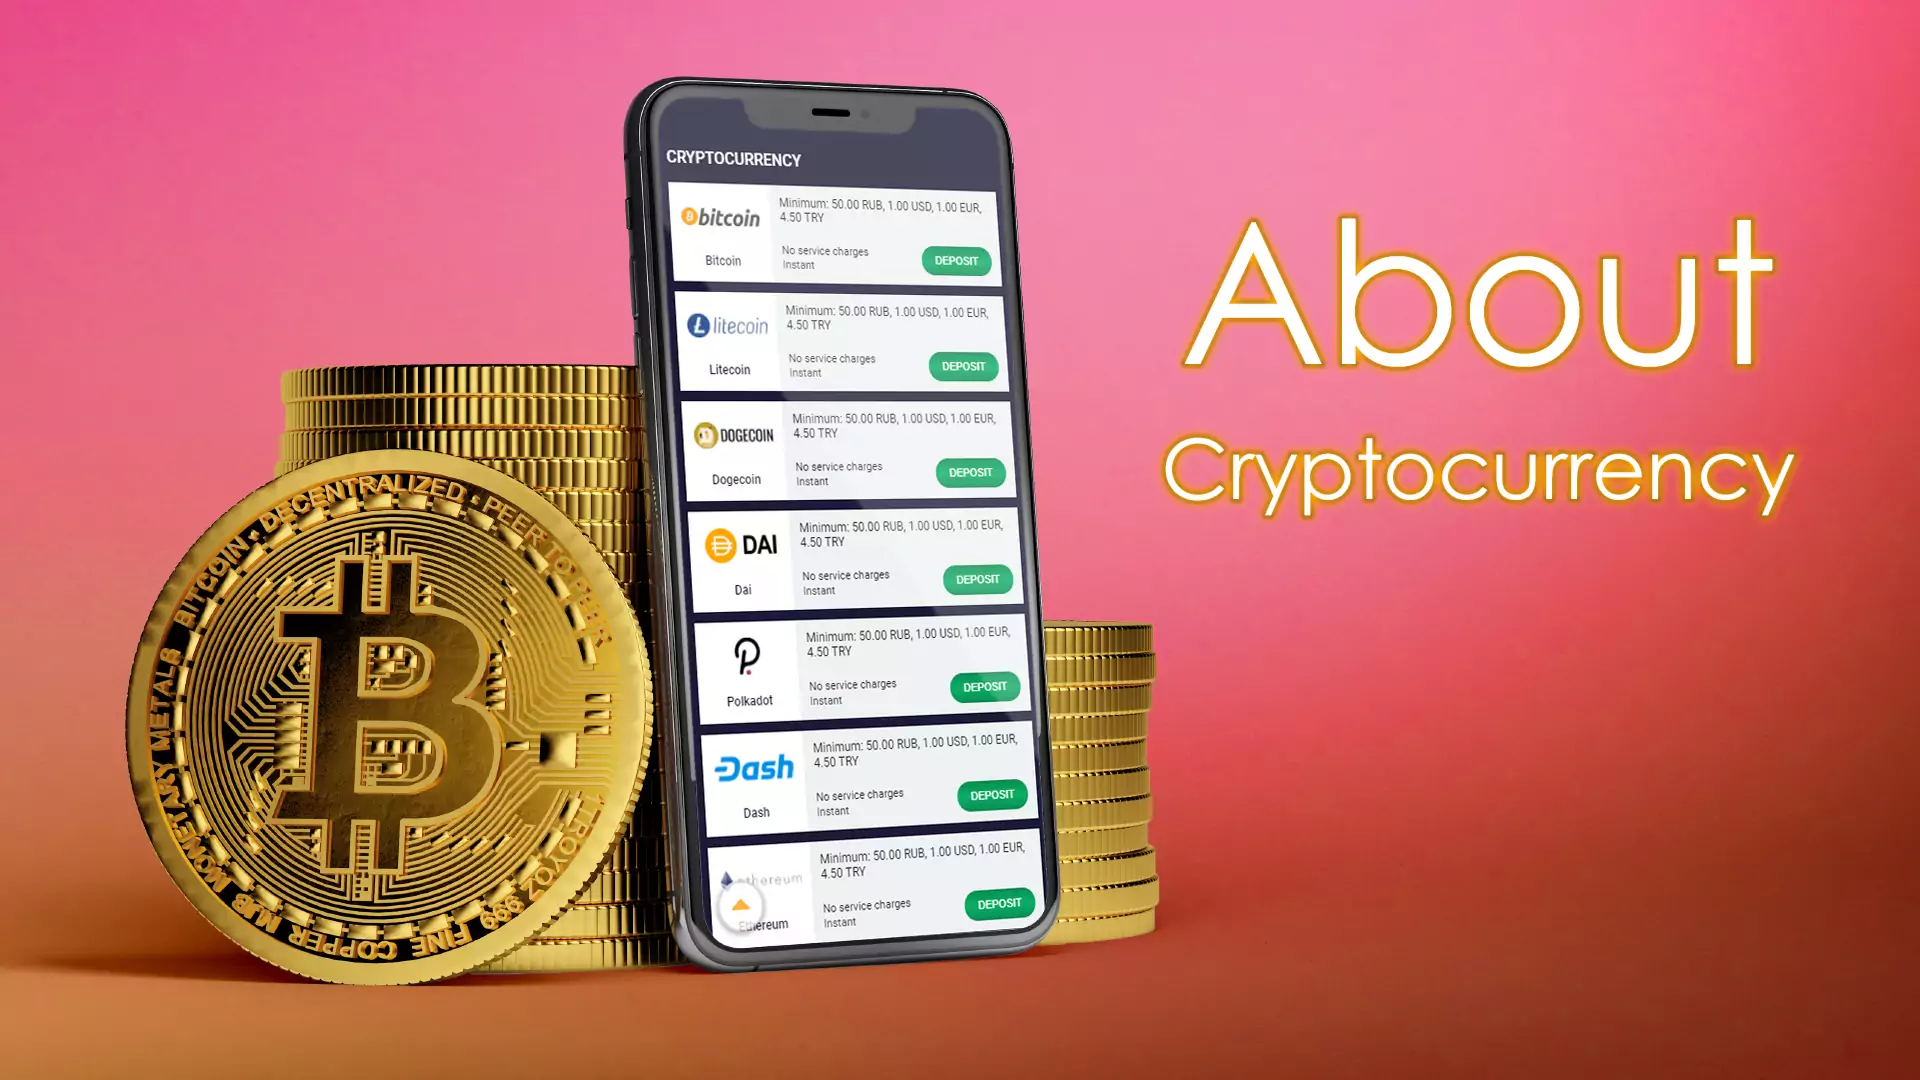 Cryptocurrency is the best way to deposit or withdraw money securely and anonymously.